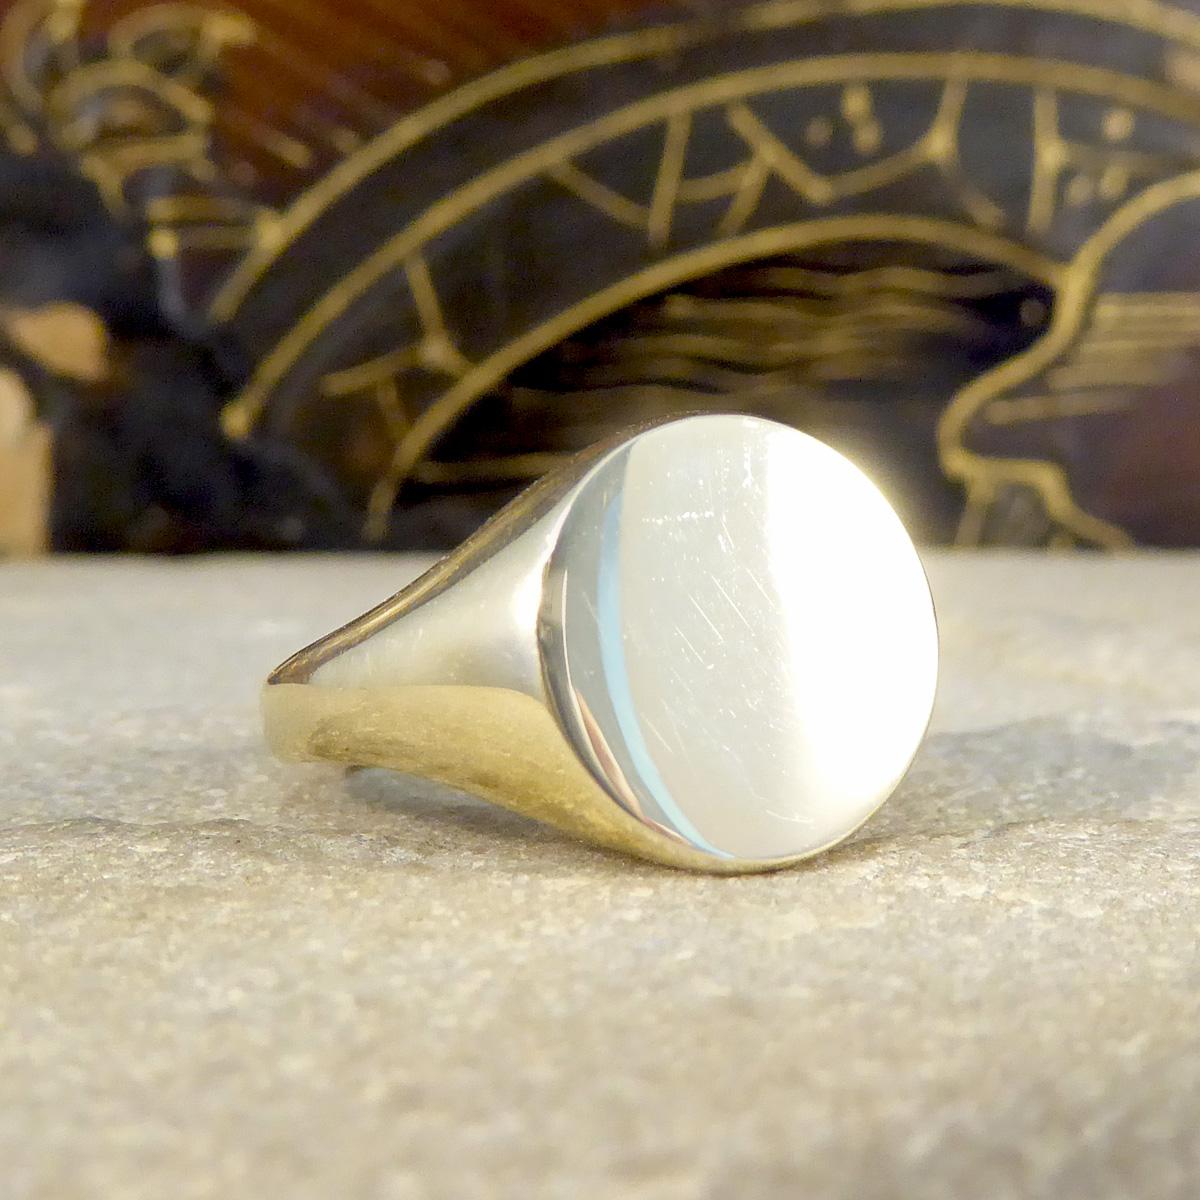 The signet ring is a classic and staple addition to any mans finger. It has become a universal unisex ring now and most commonly worn on the pinky finger. This ring is new and never worn fully crafted from 9ct Yellow Gold with a plain circular face